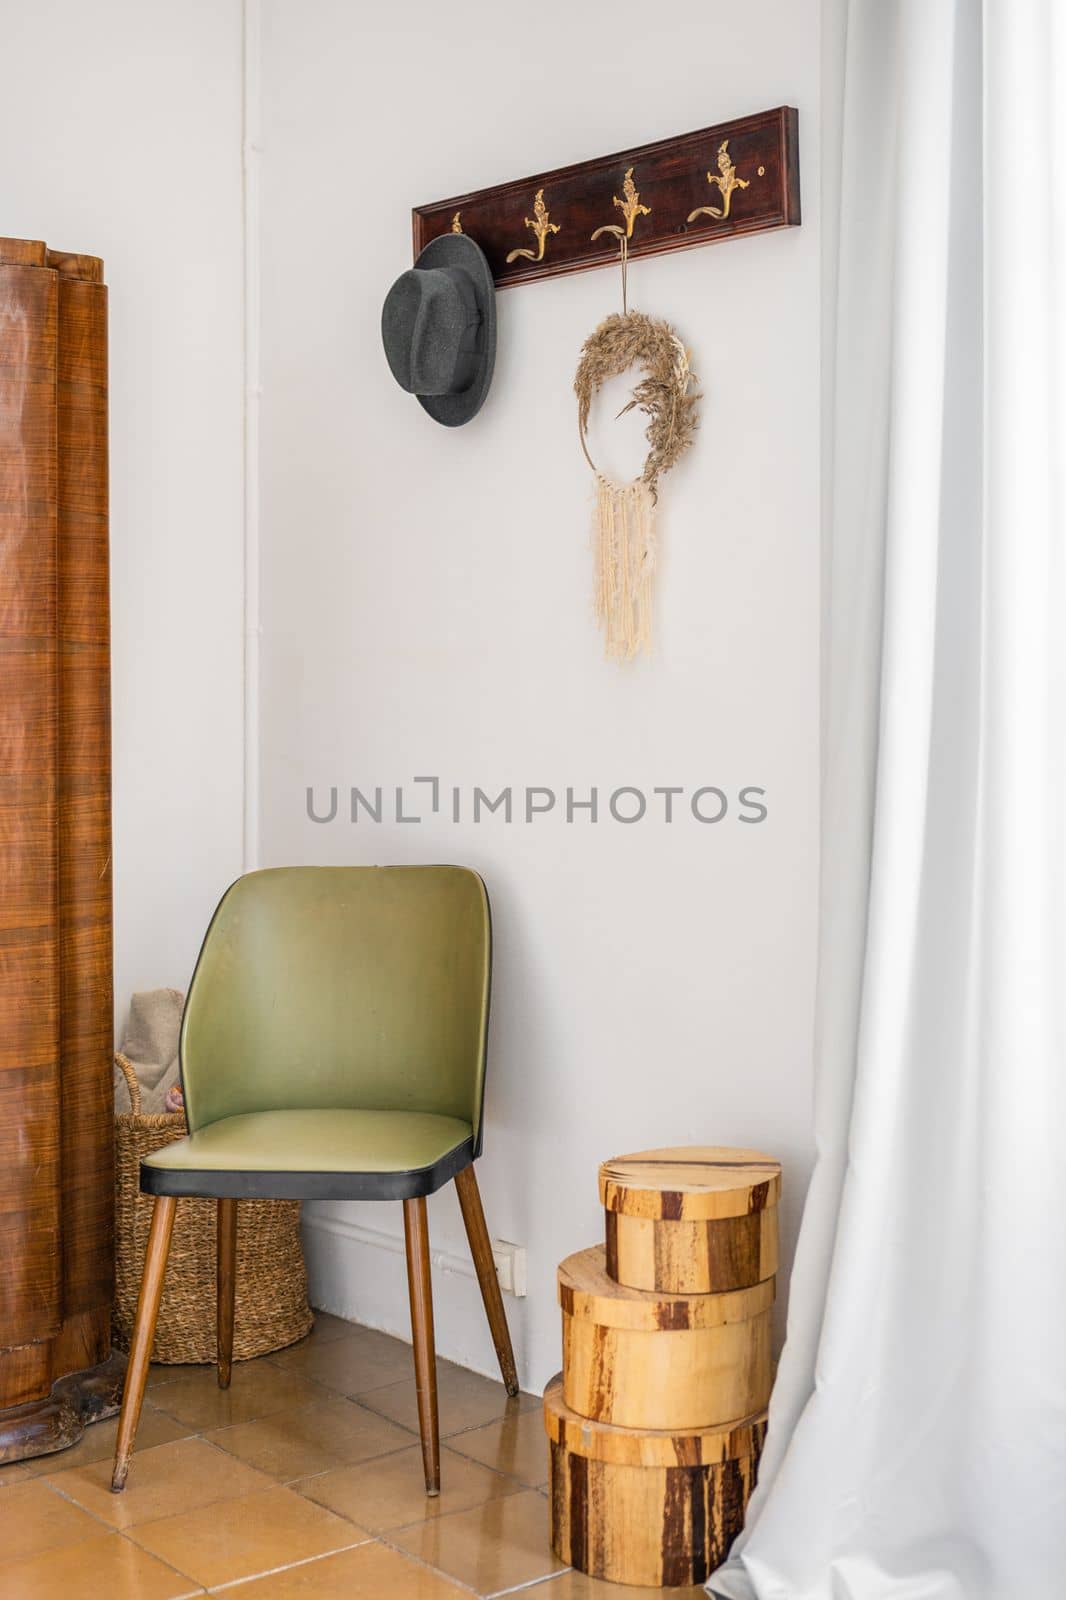 Entrance hall with white hay in atmospheric boho style. On the wall there is a carved hanger for outerwear and a man's black hat. Nice green wooden chair. Boxes on the floor for decoration. by apavlin